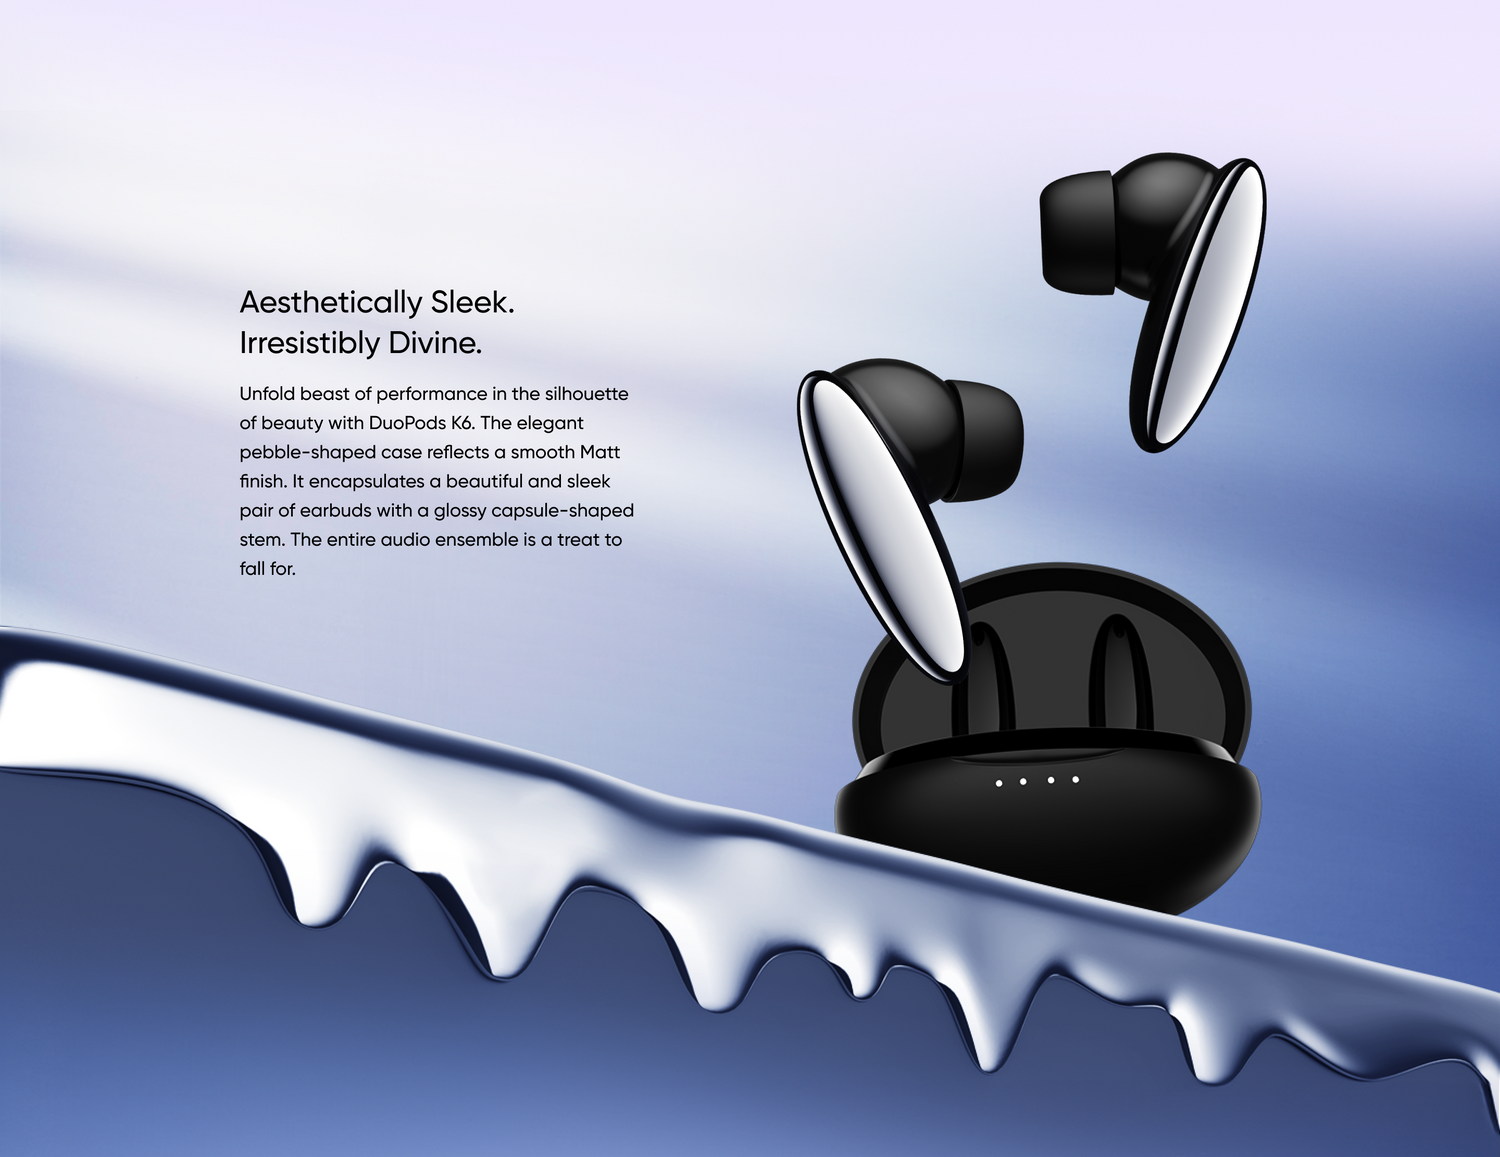 Aesthetically Sleek. Irresistibly Divine. - Unfold beast of performance in the silhouette of beauty with DuoPods K6. The elegant pebble-shaped case reflects a smooth Matt finish. It encapsulates a beautiful and sleek pair of earbuds with a glossy capsule-shaped stem. The entire audio ensemble is a treat to fall for.